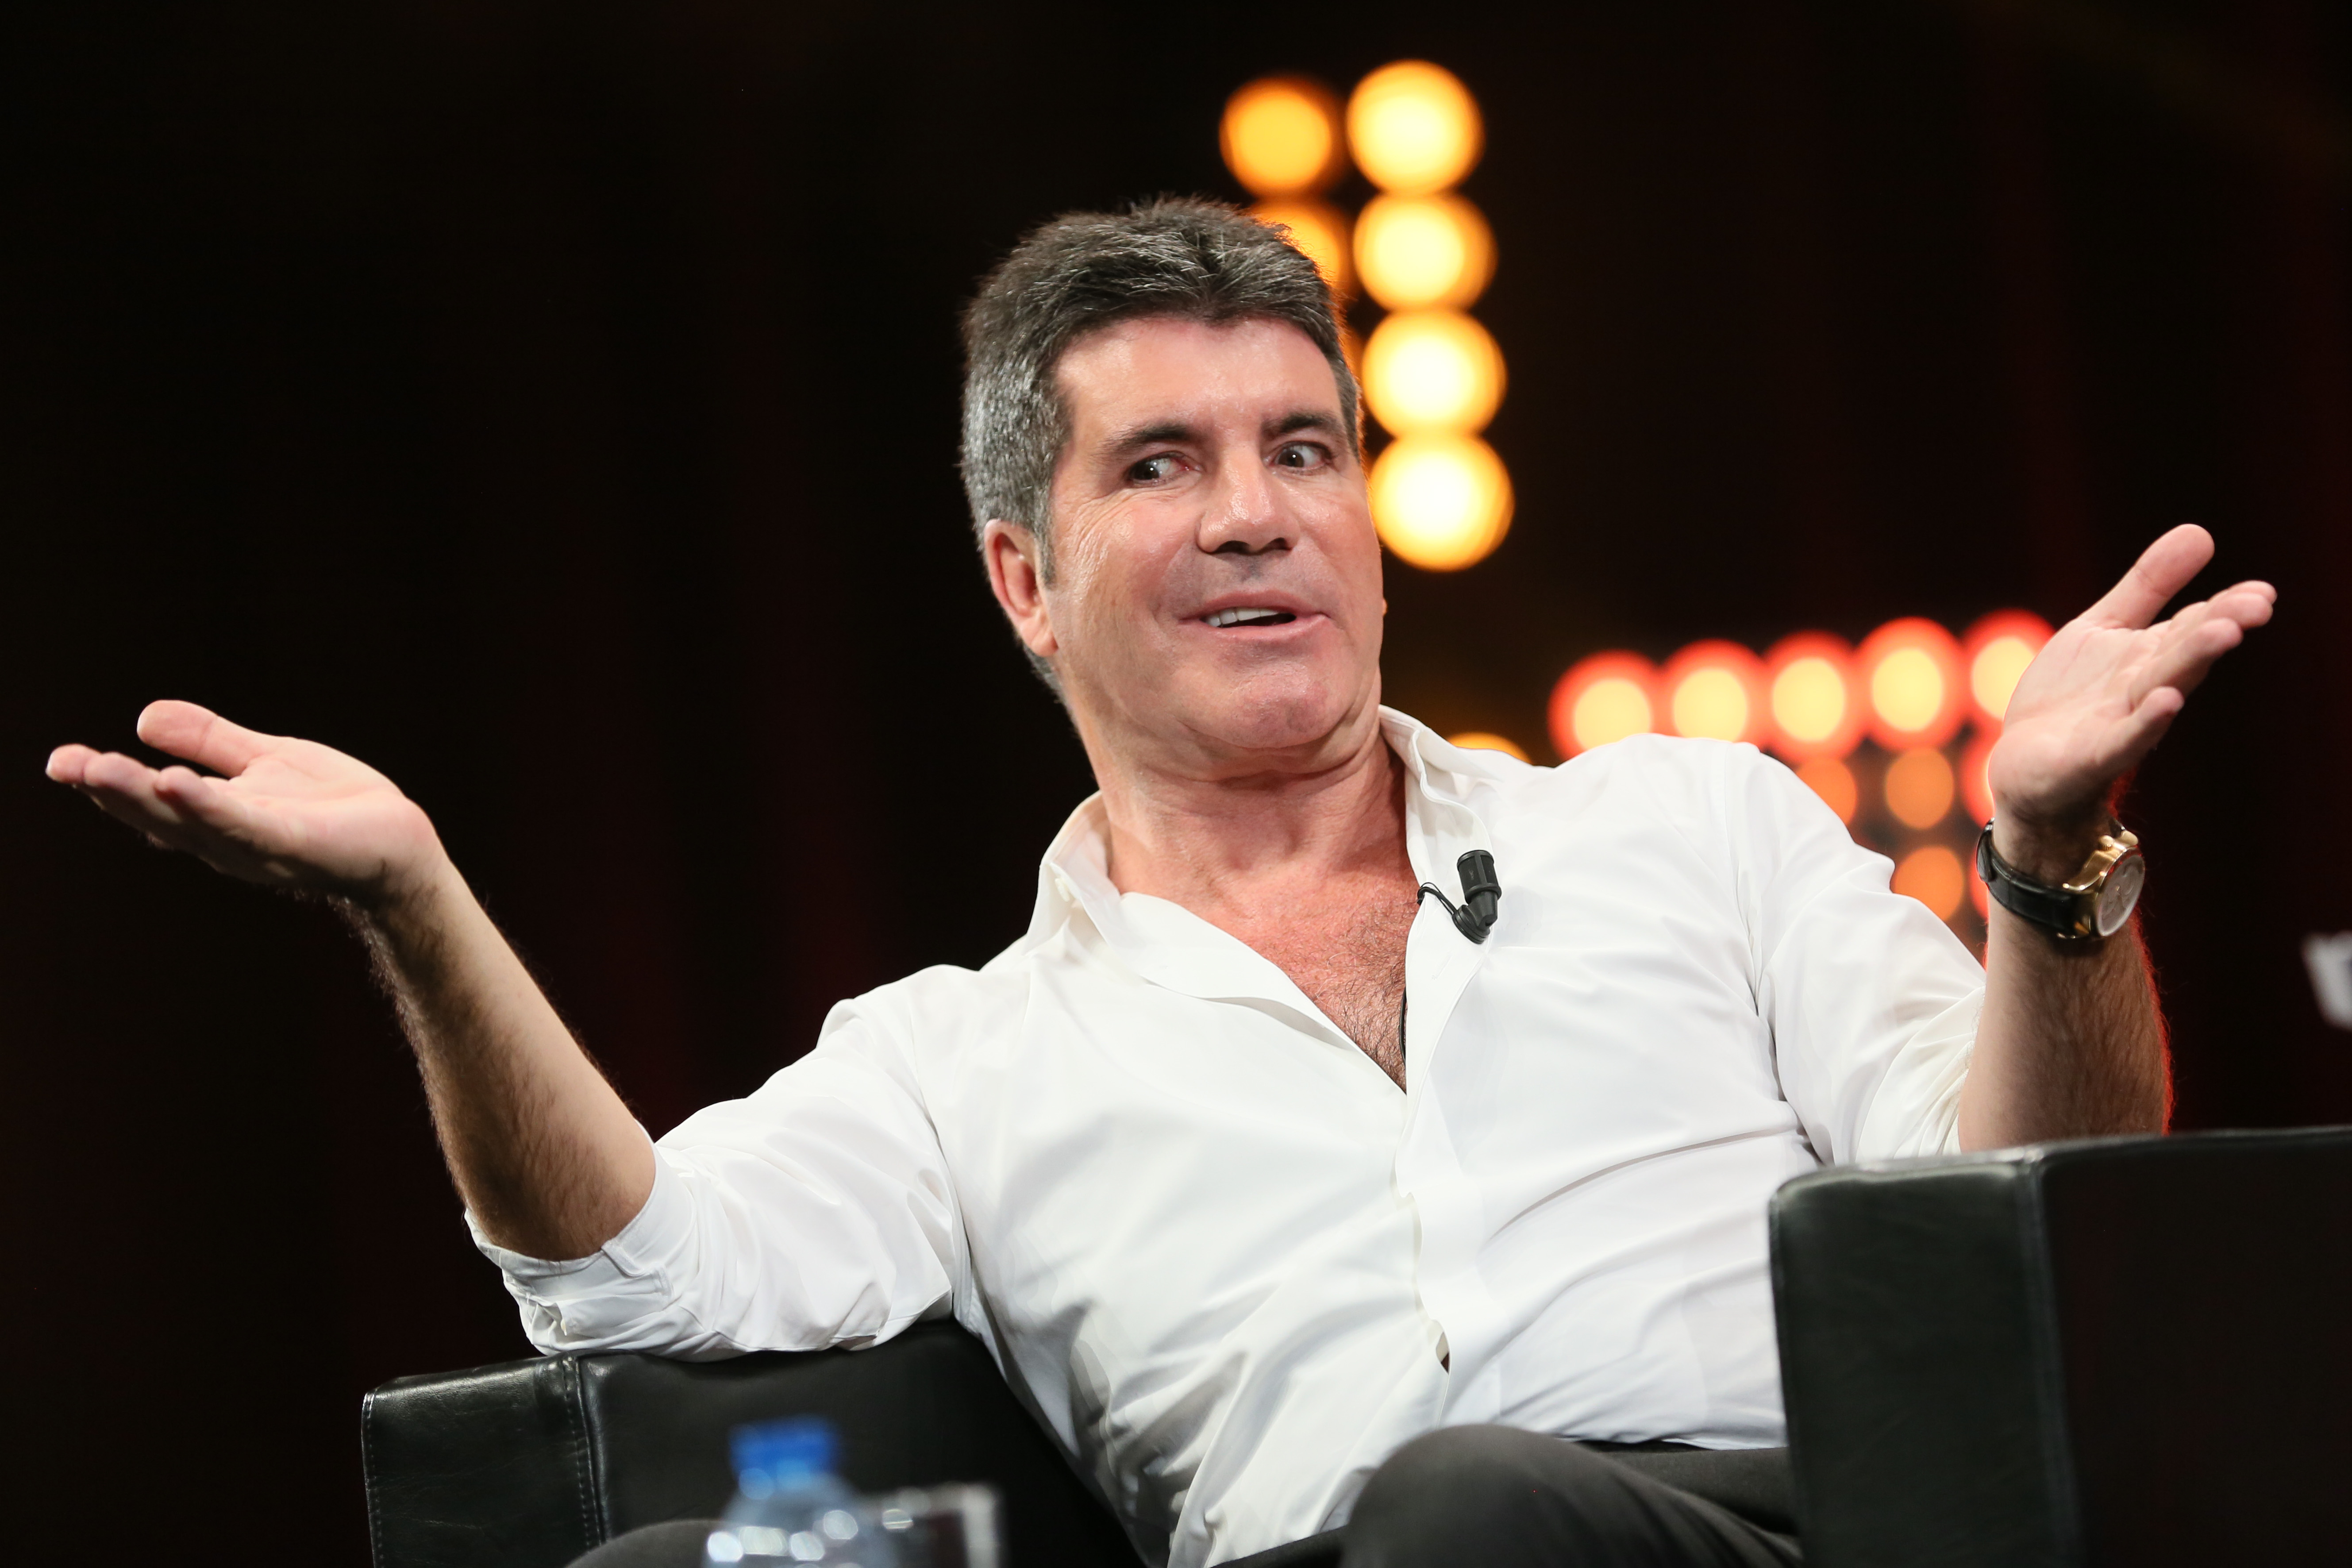 Simon Cowell when he was honored as MIPCOM Personality of the Year in Cannes in 2014 | Source: Getty Images